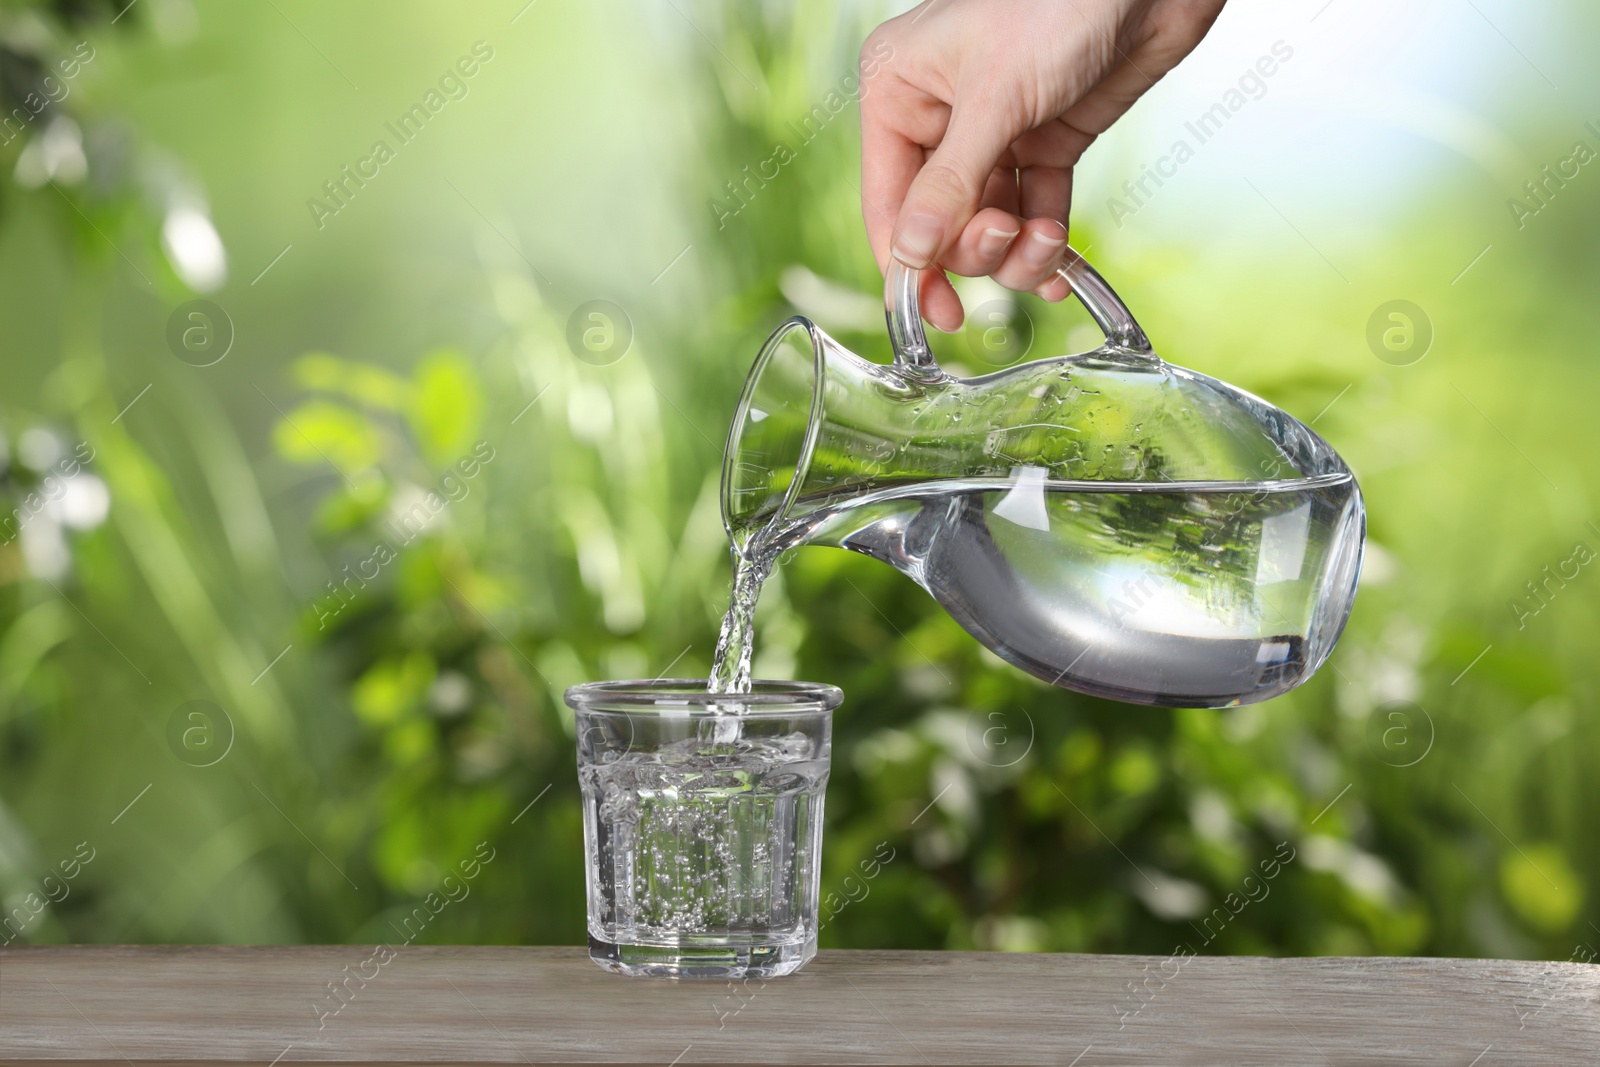 Photo of Woman pouring water from jug into glass on wooden table outdoors, closeup